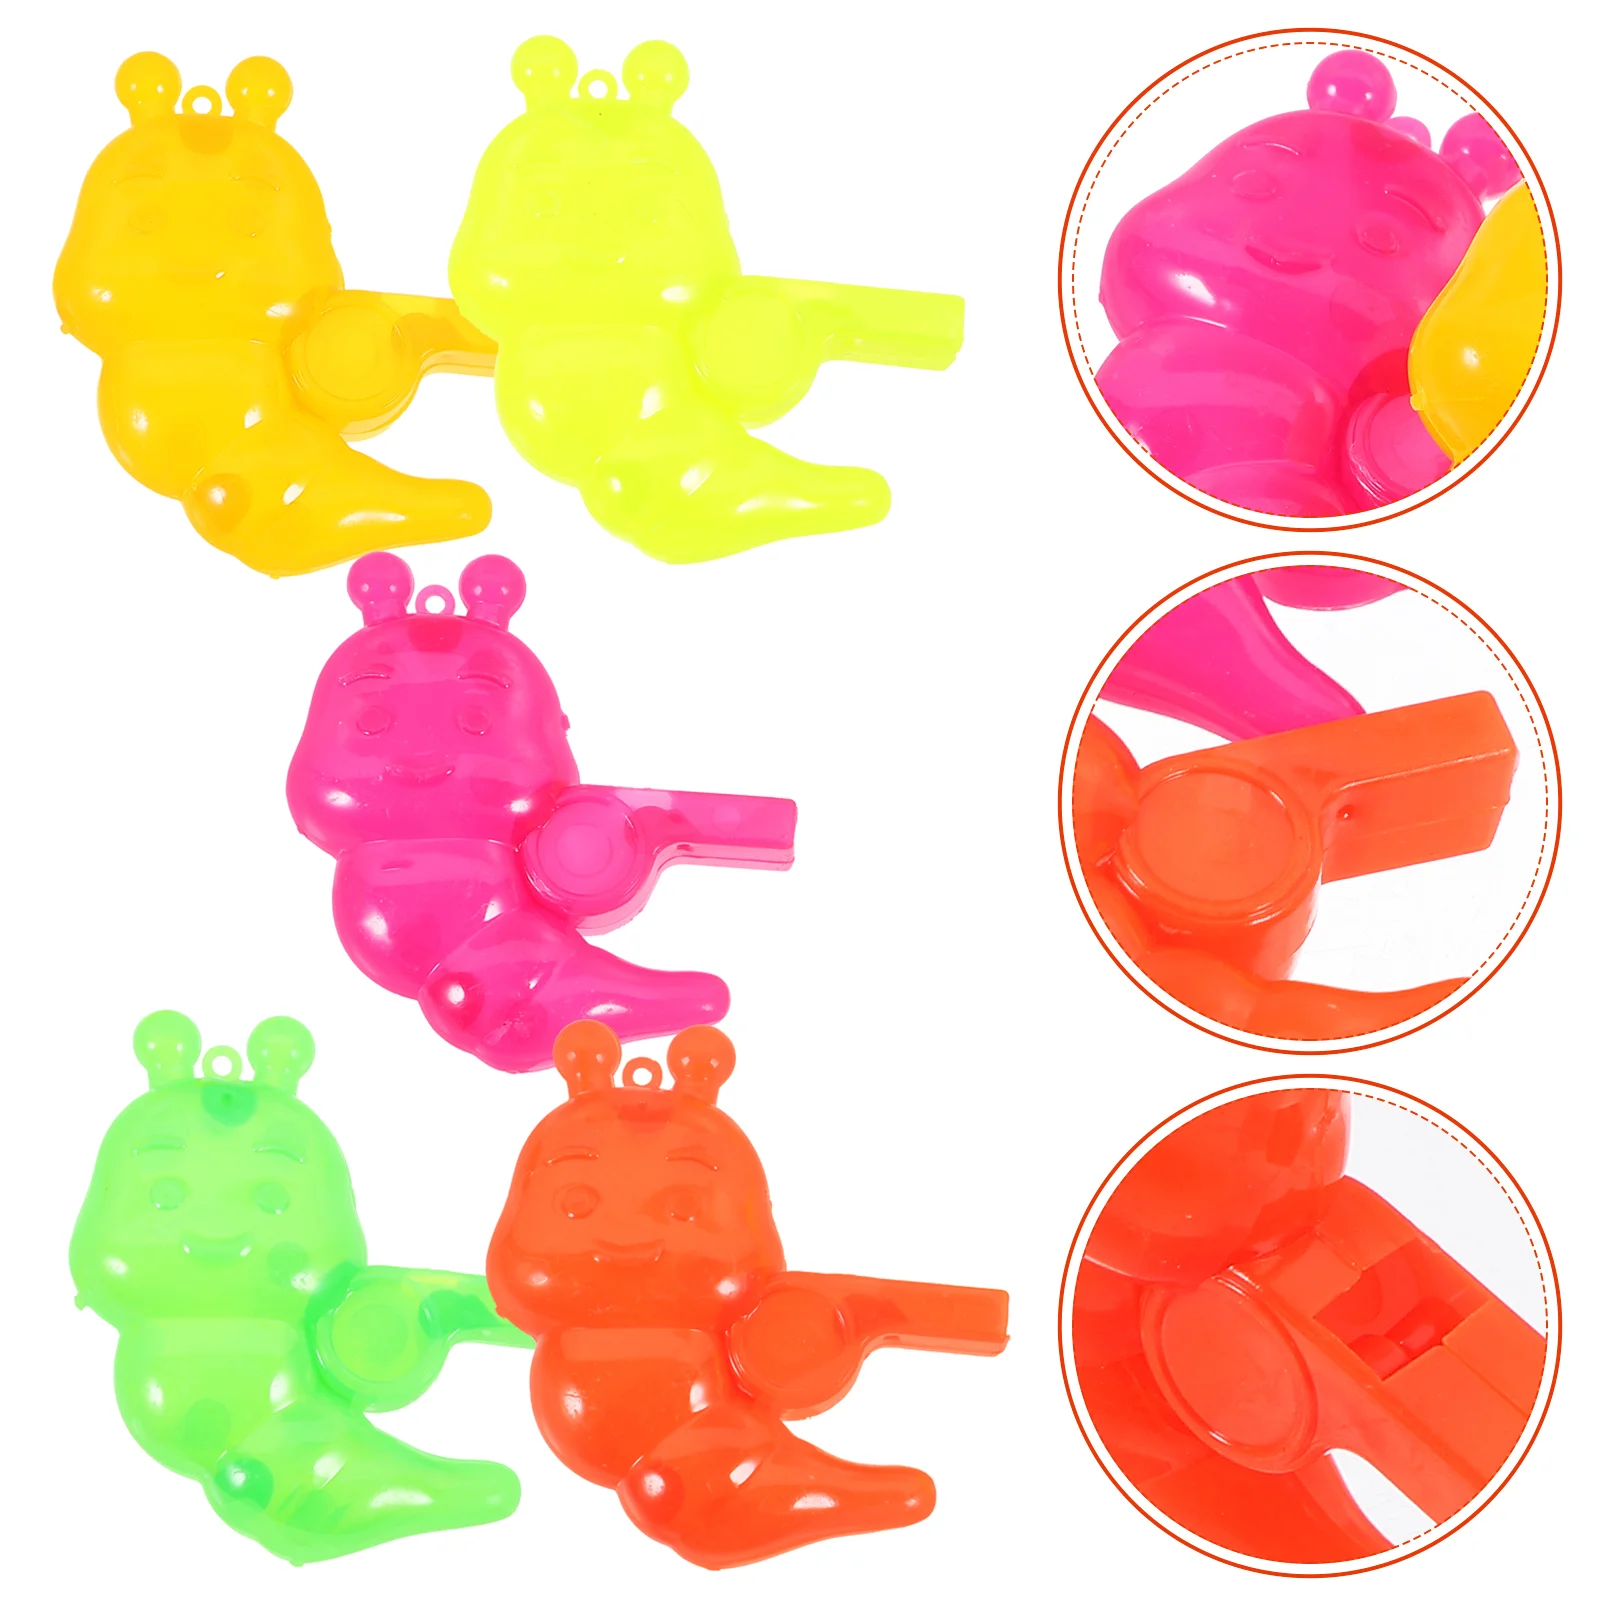 

50 Pcs Caterpillar Whistle for Kids Party Favours Infant Toys Baby Gift Animal Plaything Caterpillars Bulk Sports Trumpet